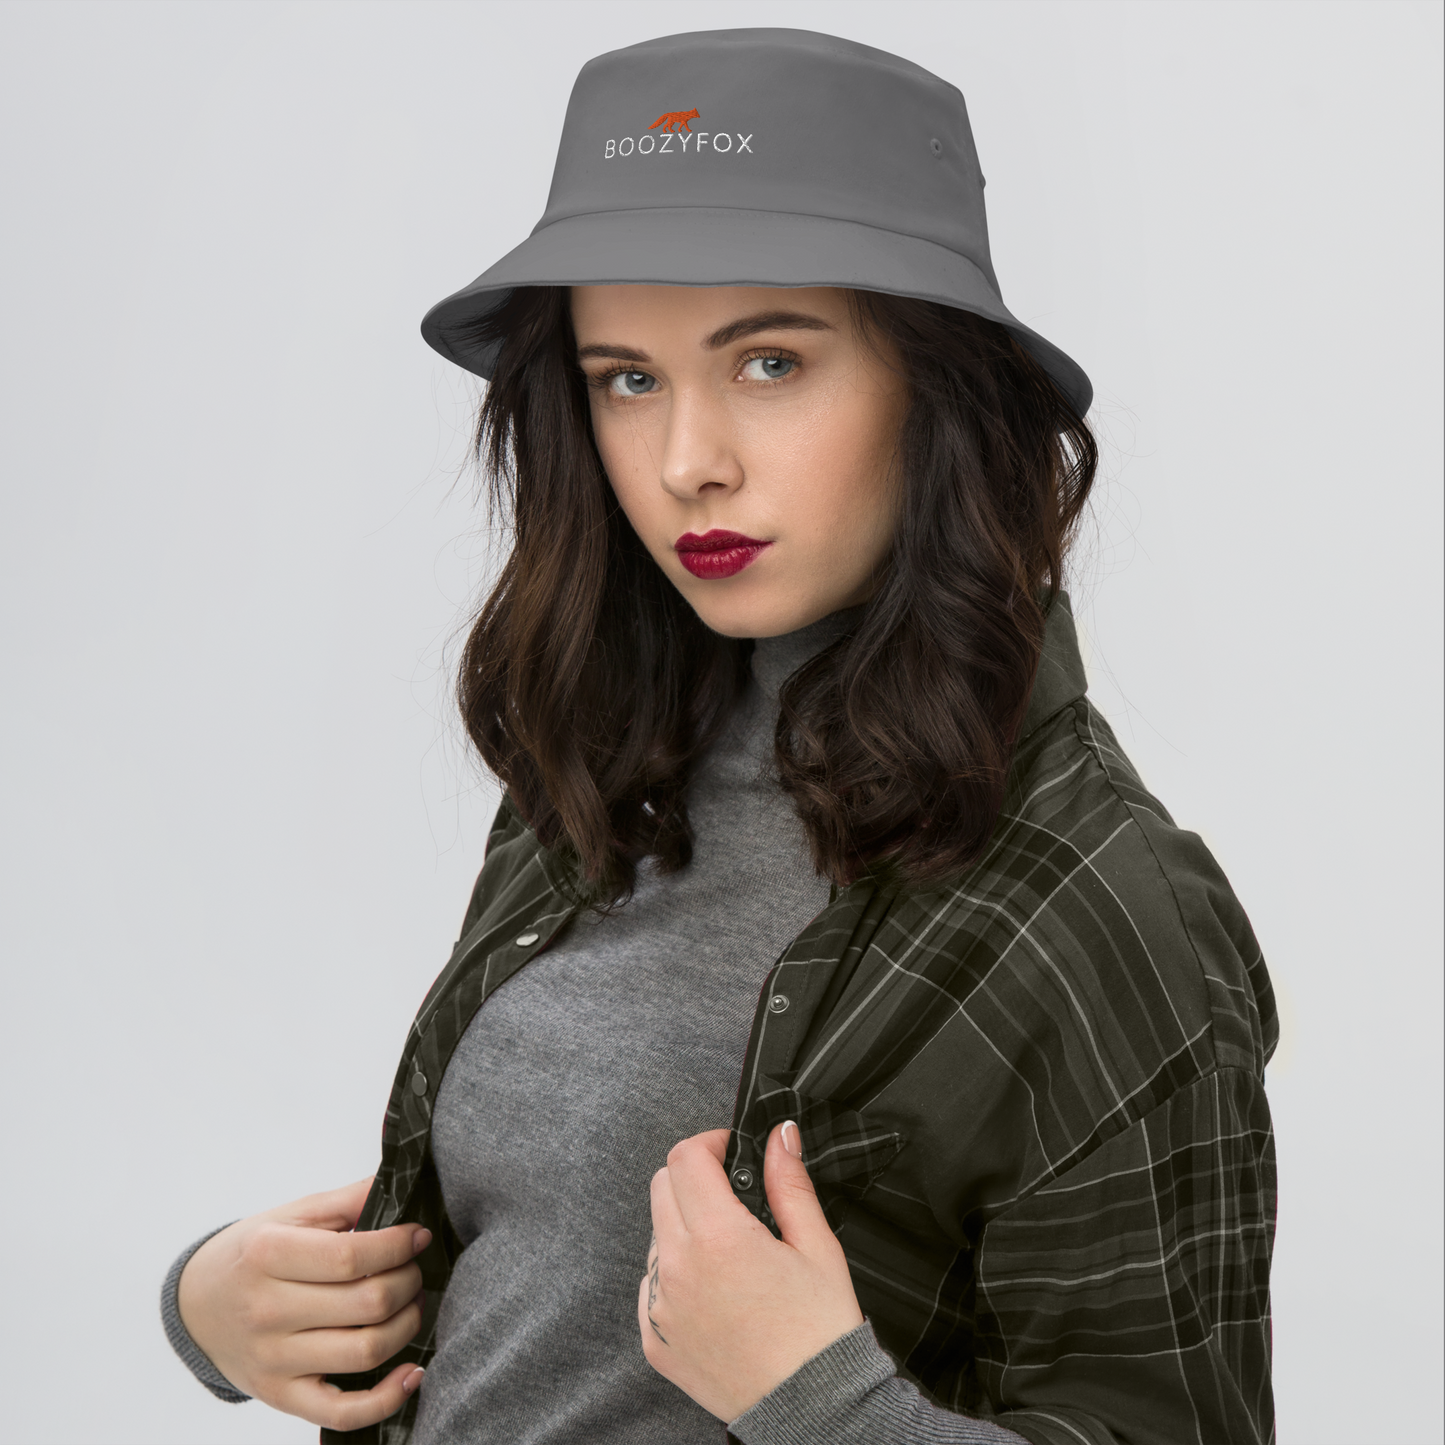 Woman wearing a Cool Grey Bucket Hat featuring a striking embroidered Boozy Fox logo on front. Shop Cool Sun Protection Bucket Hats And Wide Brim Hats Online - Boozy Fox